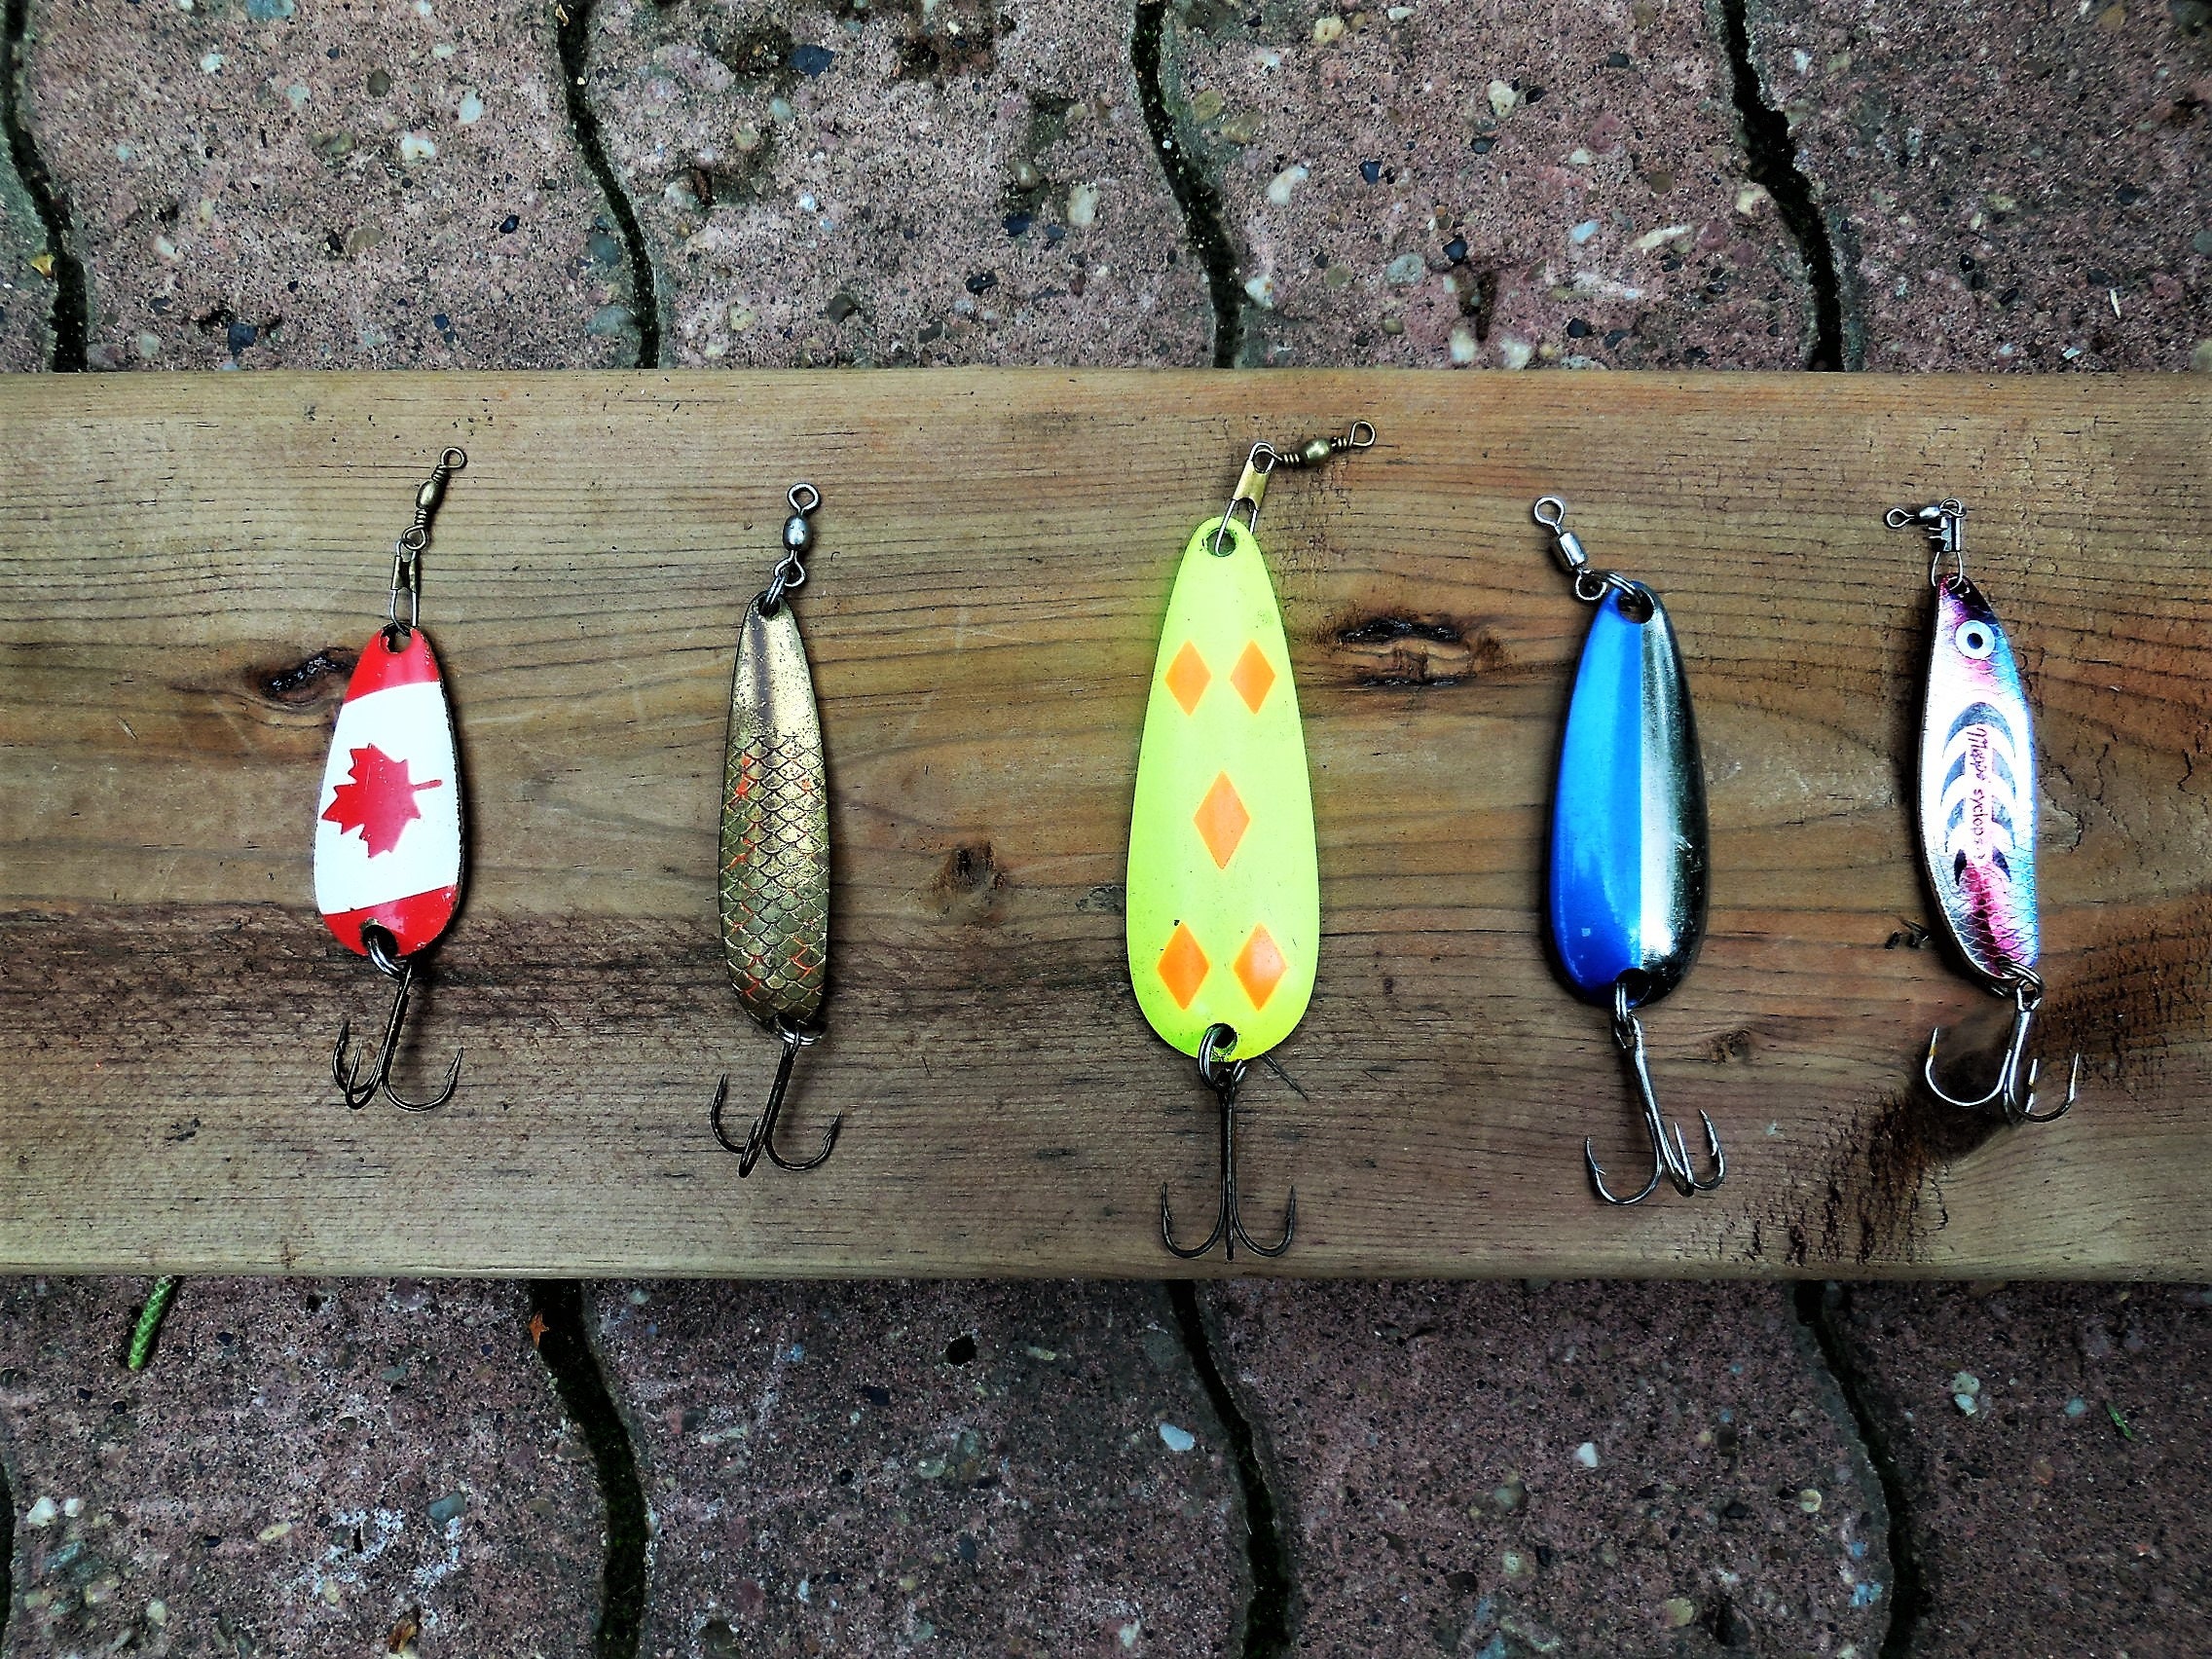 Vintage Fishing Lure Lures Lot Gift for Fathers Day Lot of Five 5